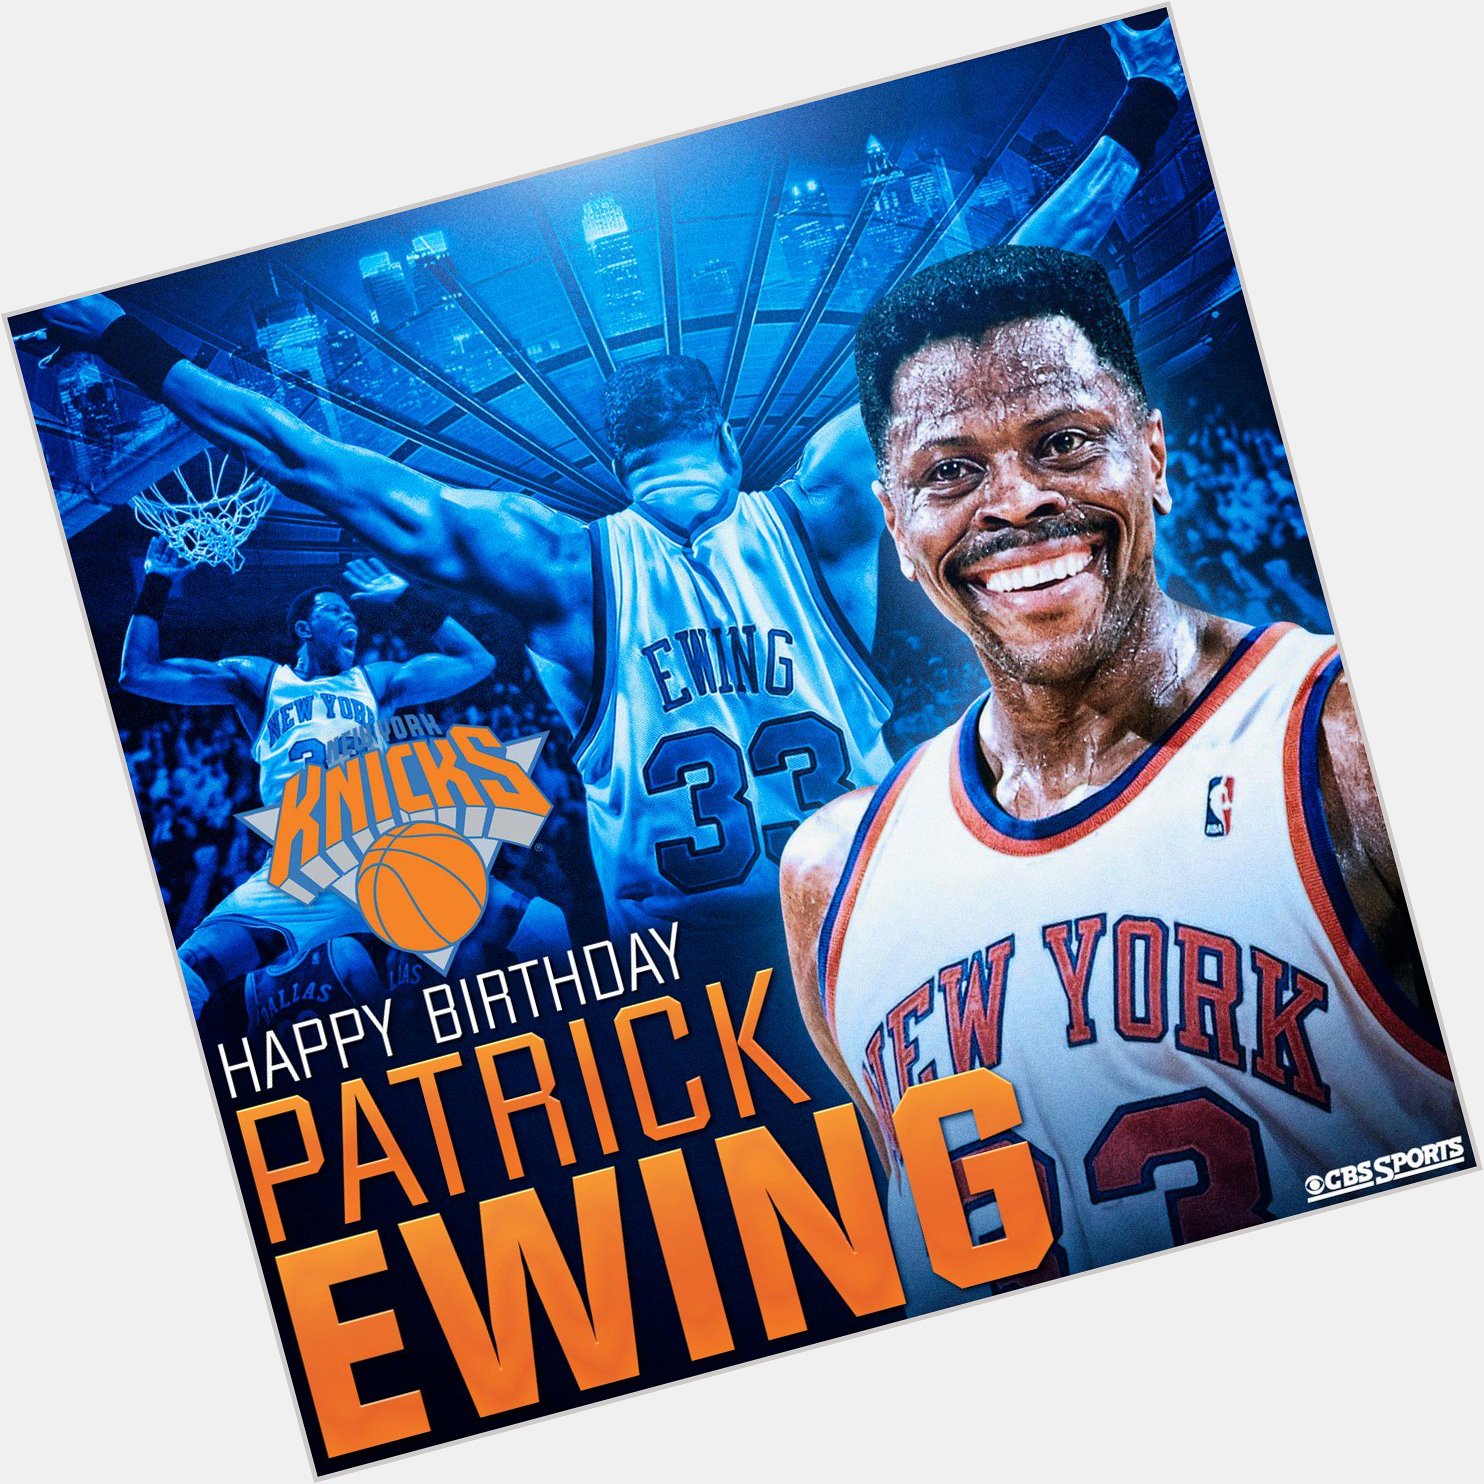 Happy Bday to the best player in franchise history (& my Mom\s favorite bballplayer ever) Patrick Ewing!! 